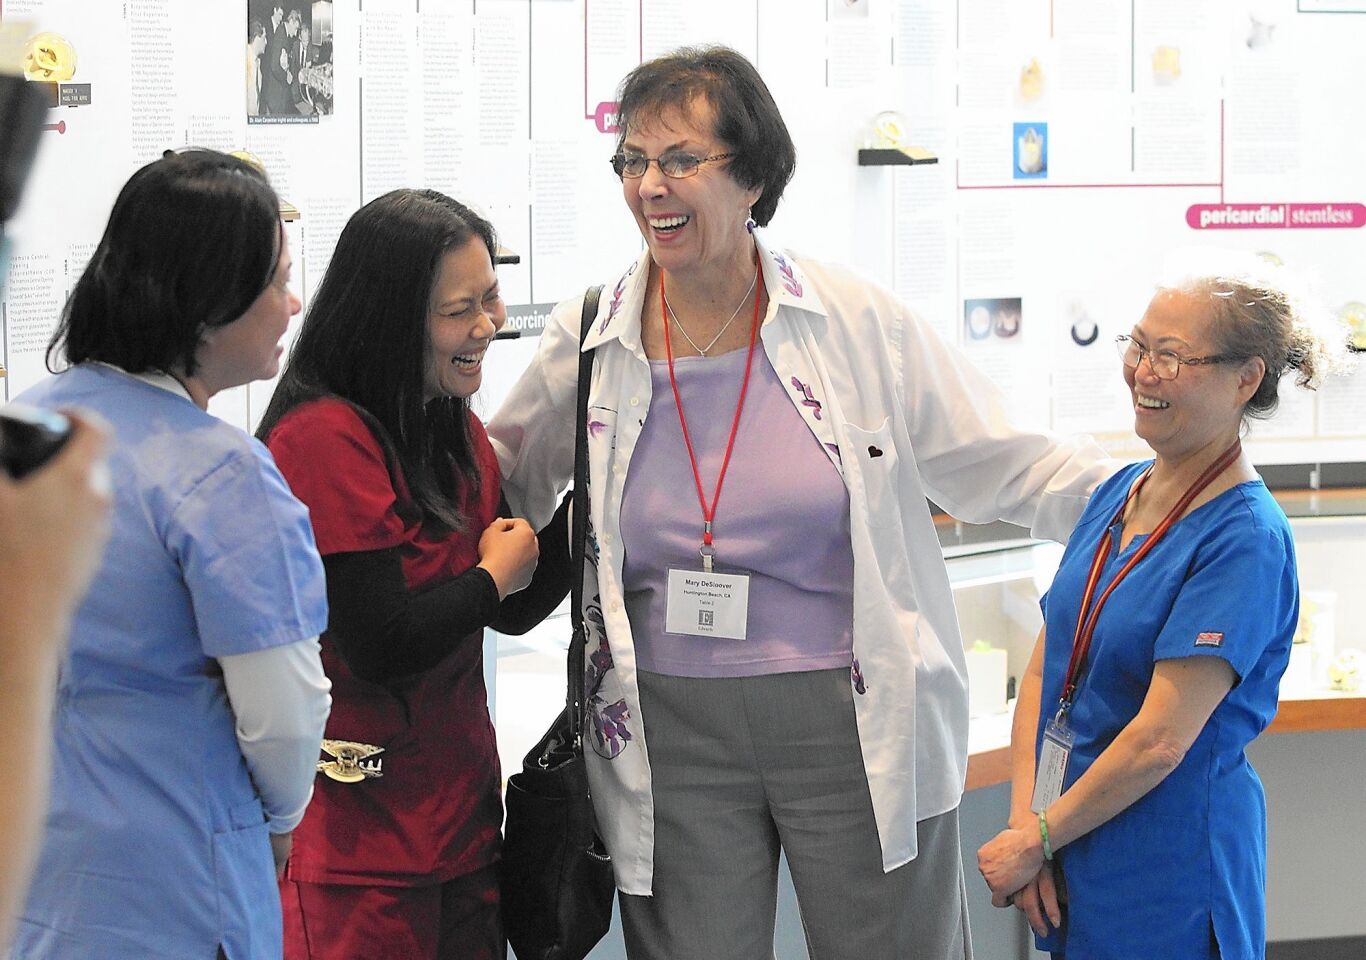 Heart patient Mary DeSloover, center, of Huntington Beach, thanks part of her surgical team during Edward Lifesciences Patient Day on Friday in Irvine.